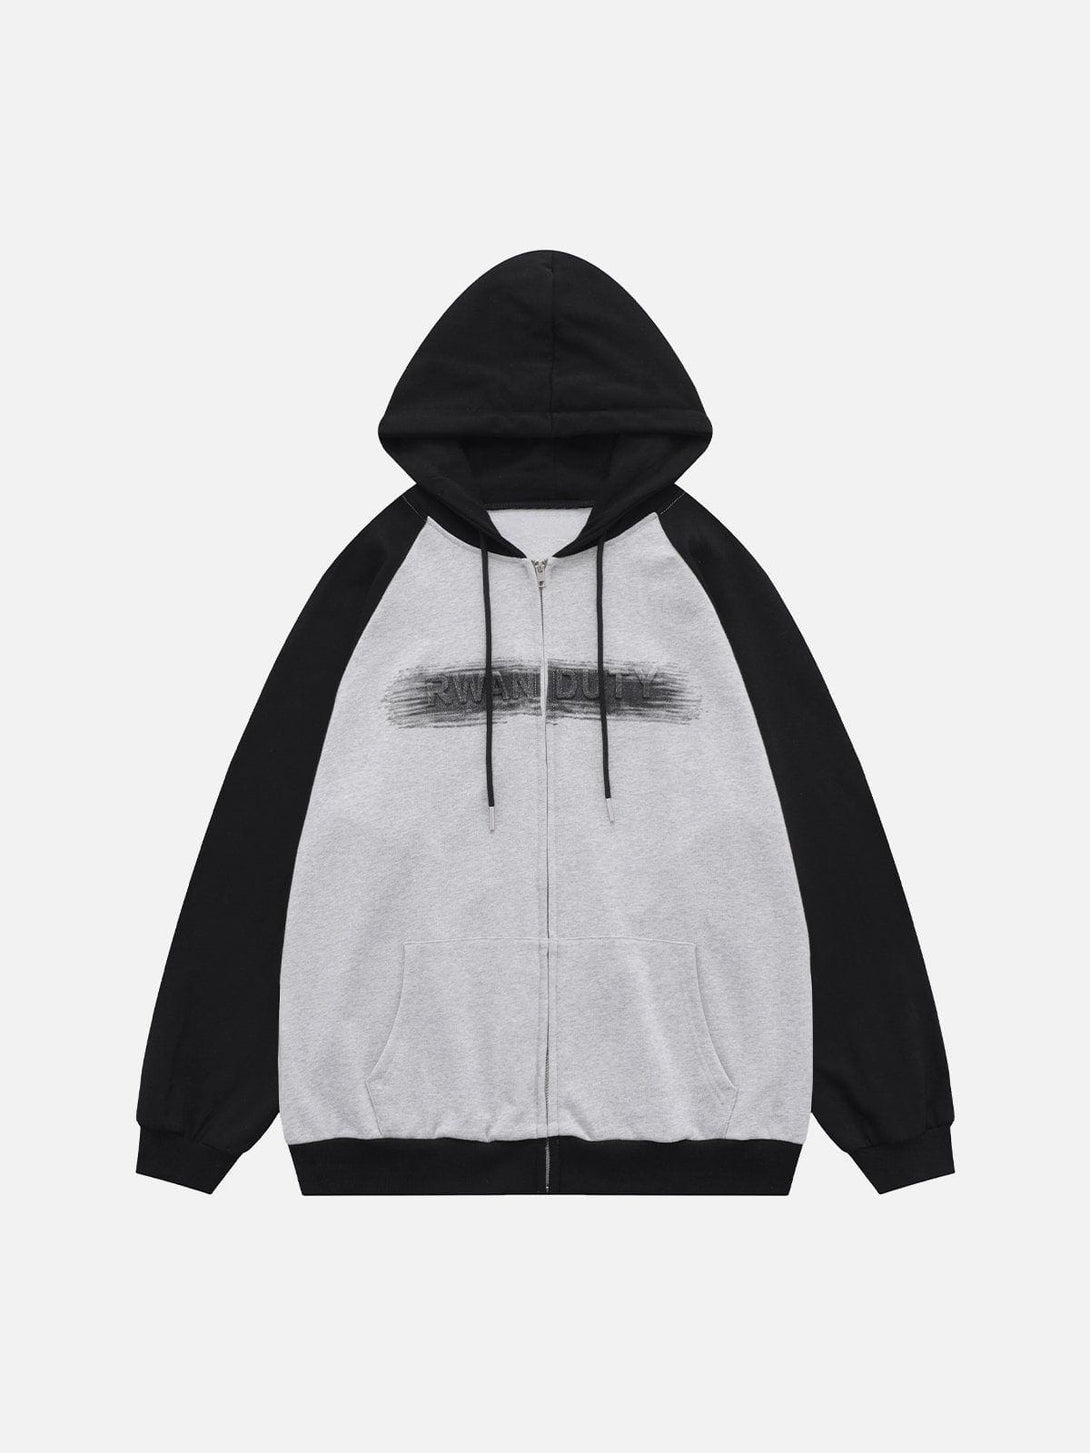 Levefly - Steel Stamp Letters Print Hoodie - Streetwear Fashion - levefly.com